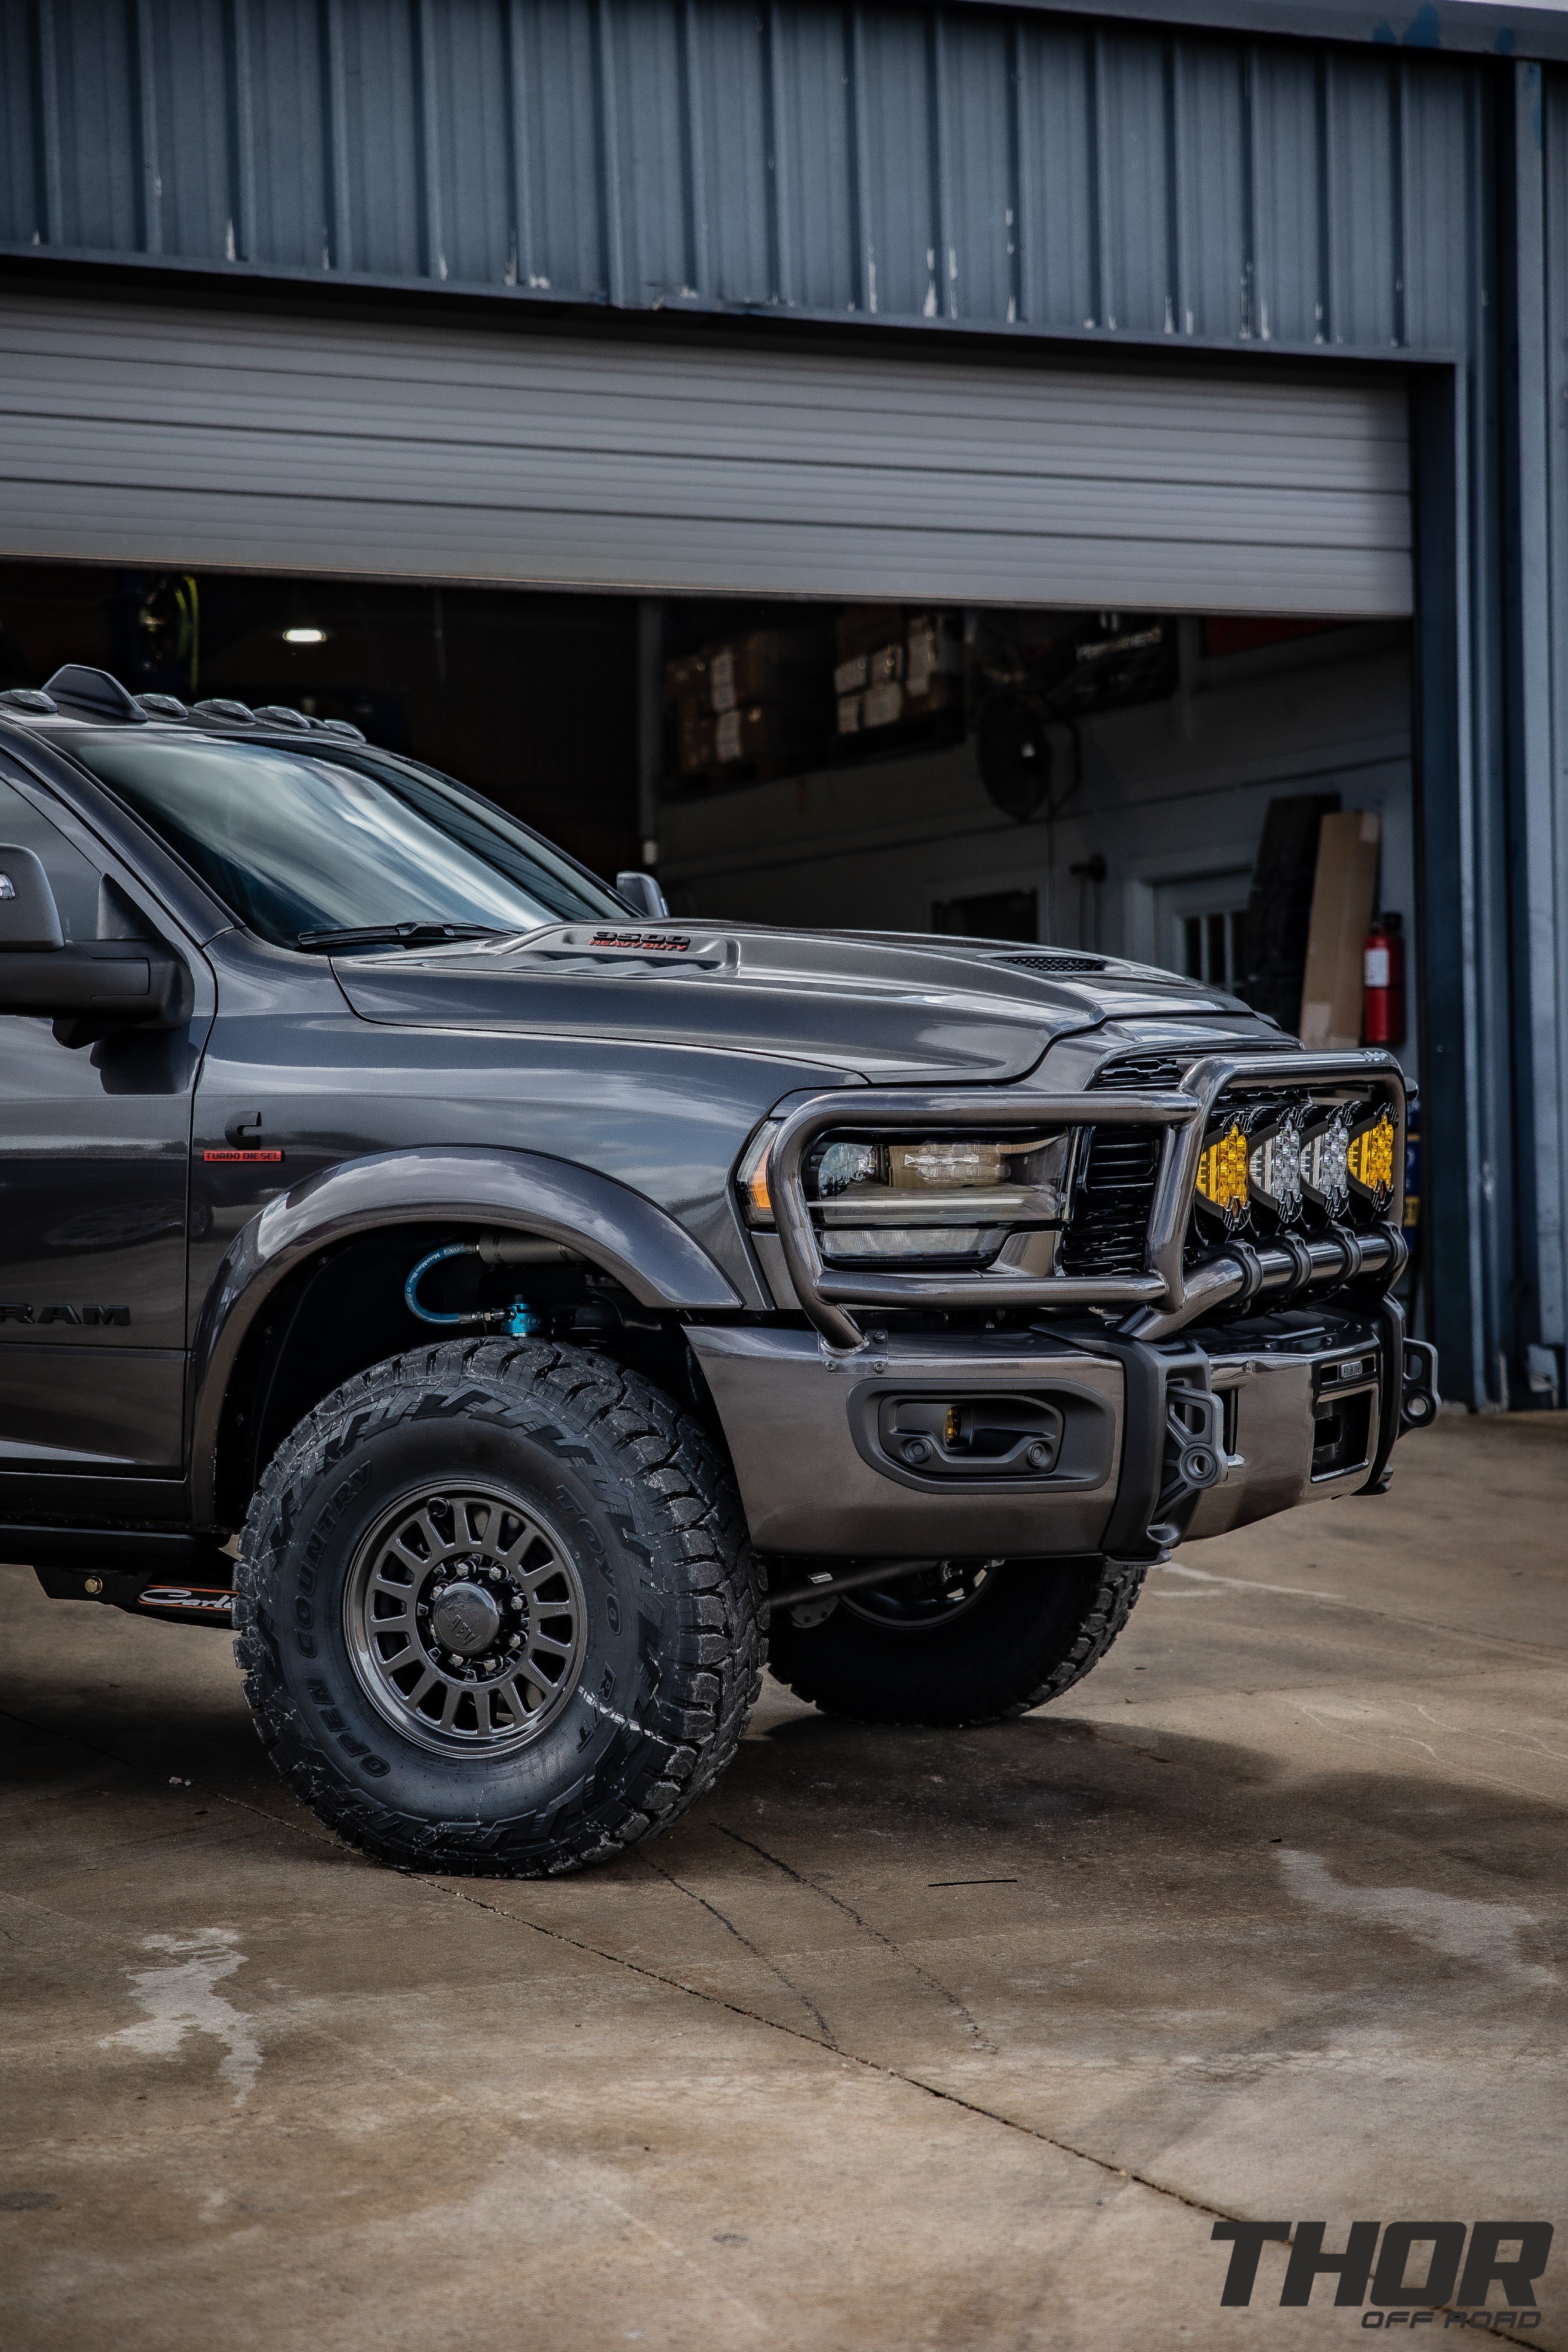 2023 RAM 3500 Limited in Grey with Carli 3.25" Pintop Suspension System, Carli Leaf Springs, Carli Torsion Sway Bar, Carli High Mount Steering Stabilizer, Carli Low Mount Steering Stabilizer, Carli Fabricated Radius Arms, AEV HD Low Tube Front Bumper, AEV 17"x8.5" Salta Onyx Wheels, 37x12.50R17 Toyo RT Tires, Smart Cap, Decked System, LP9 Clear Pro Driving Combo Lights, LP9 Amber Pro Driving Combo Lights, Baja Design Flush Mount Squadron Lights, Baja Design Fog Light Pocket Kit, BW Tow and Stow Hitch, Fender Flares, Titan XL 50 Gallon Fuel Tank, Valentine V2 Blend Mount, Magnaflow Exhaust